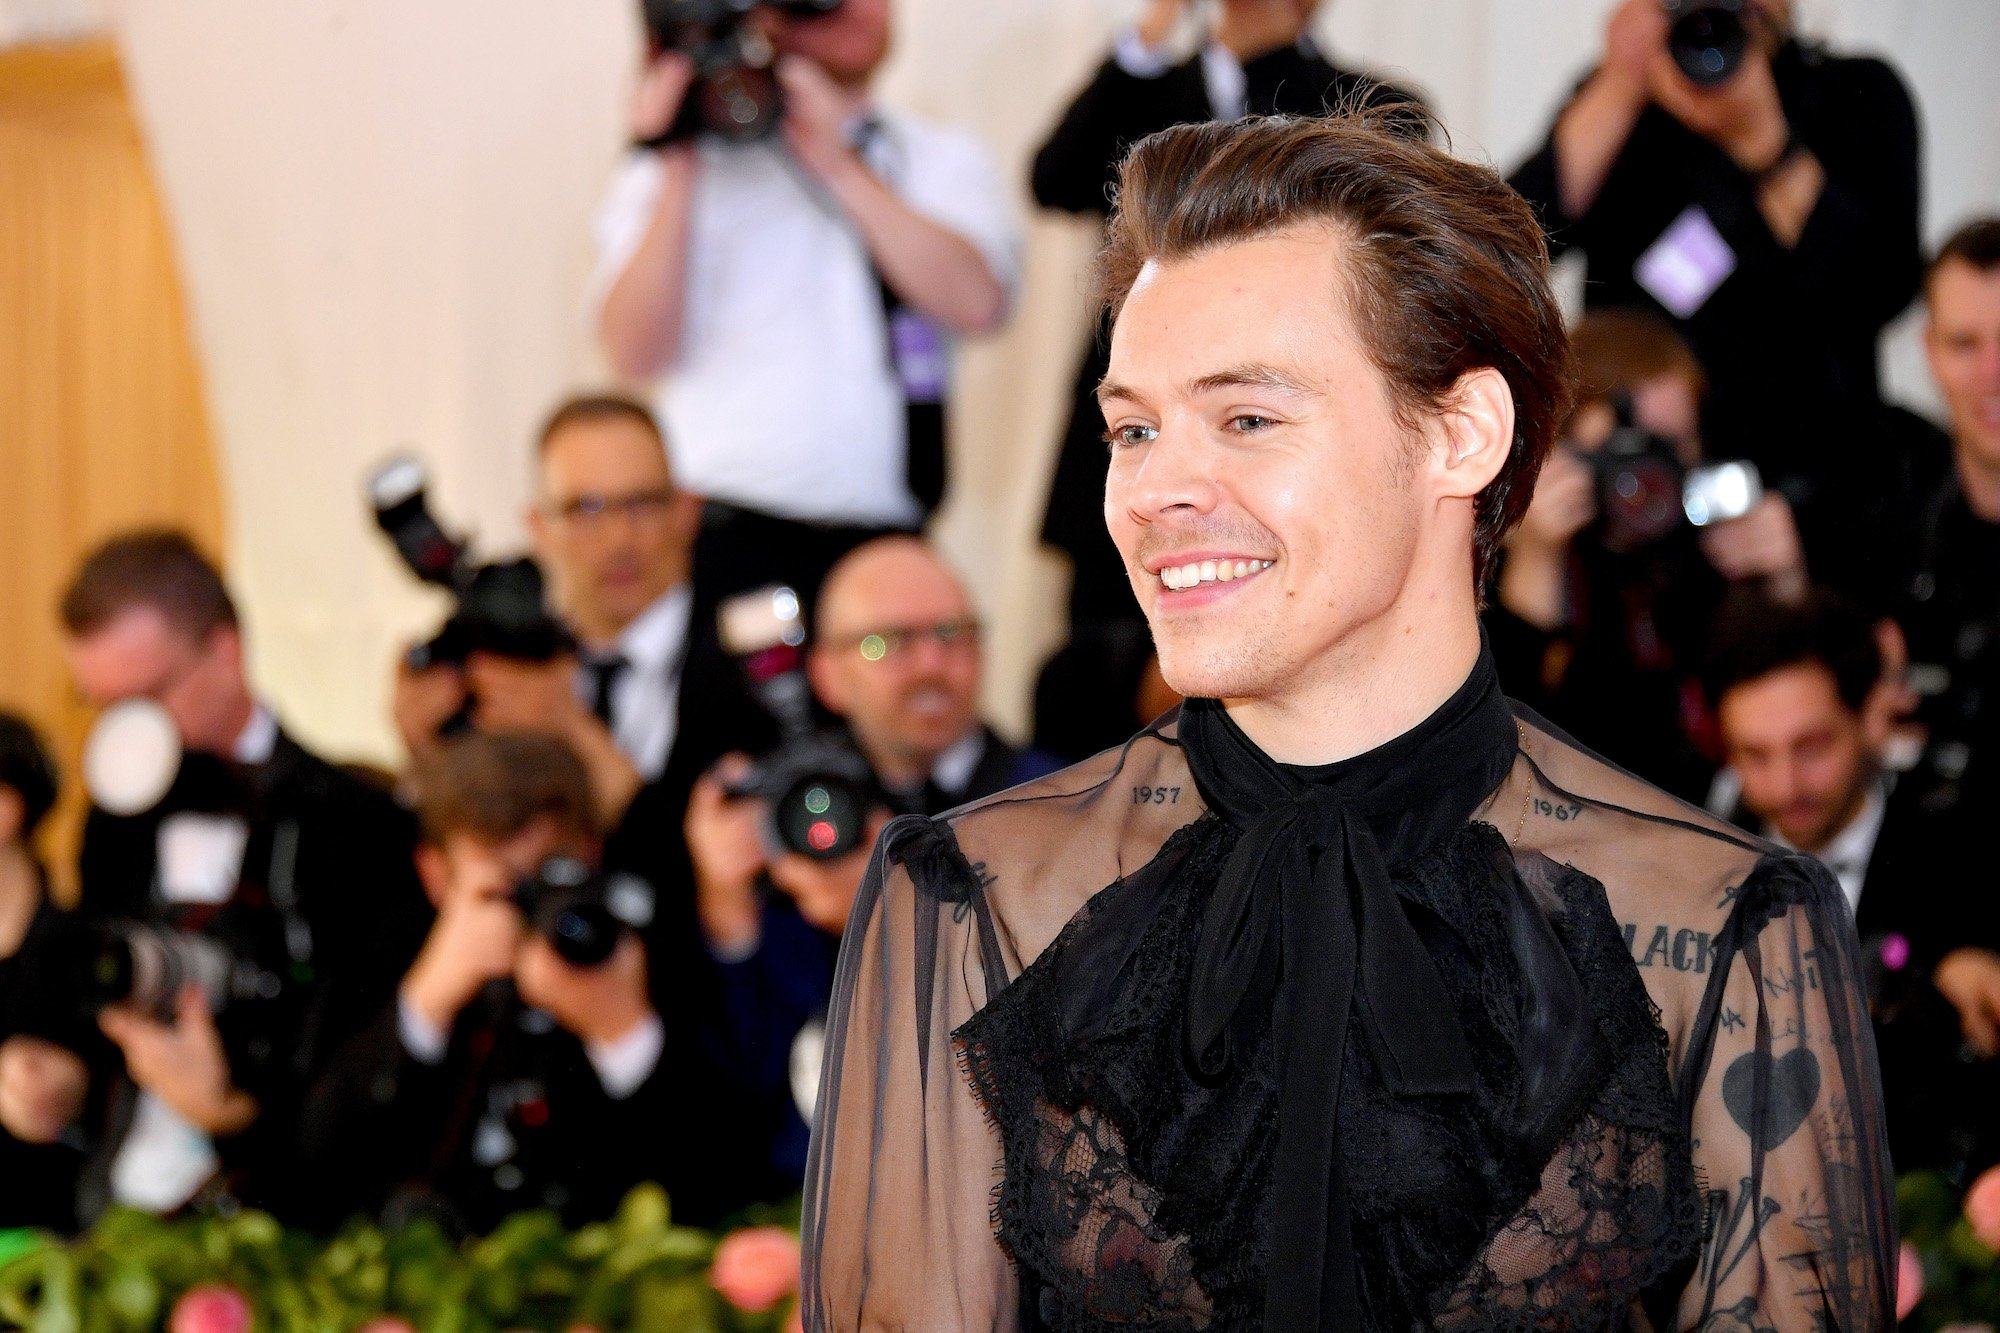 Harry Styles Is Set To Appear in New Film With Dakota Johnson and This ‘Little Women’ Actor